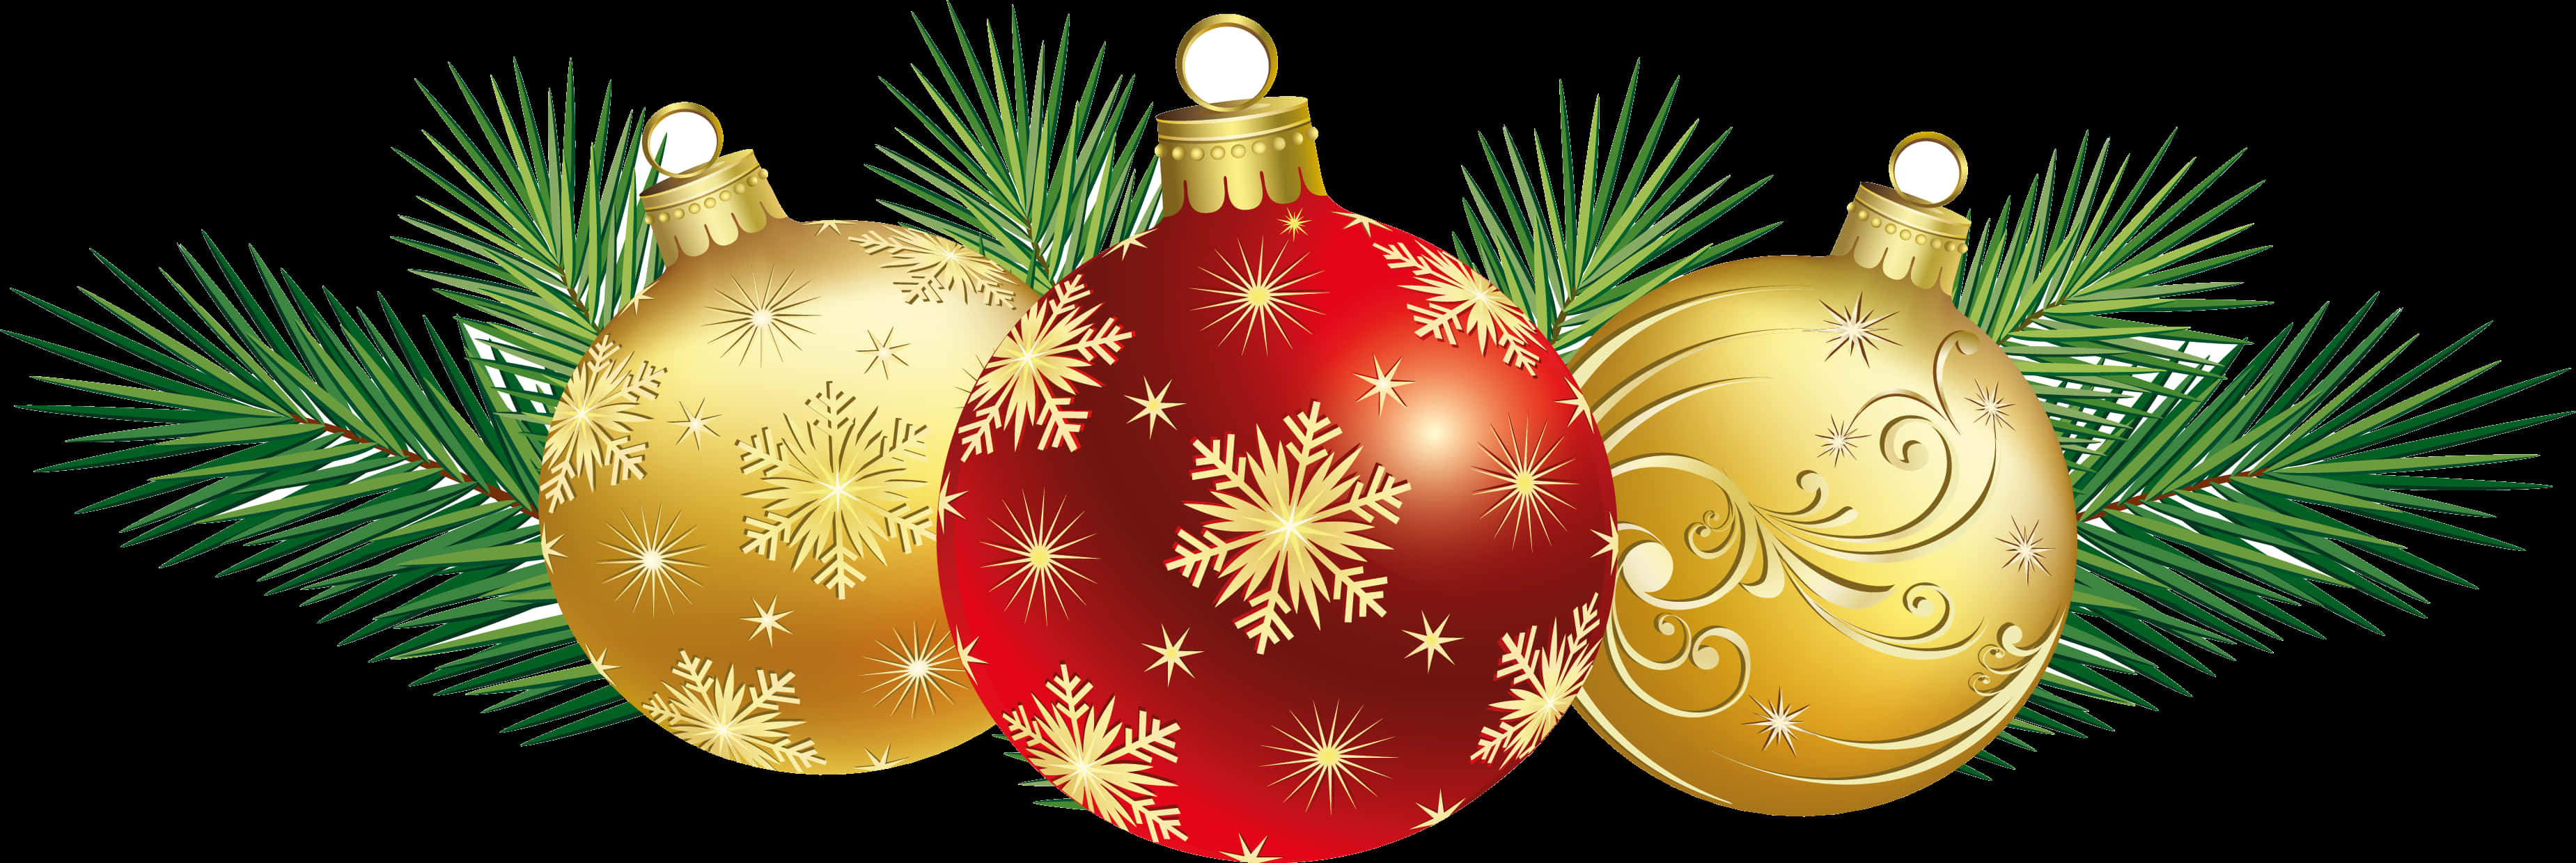 Festive Christmas Ornamentswith Pine Branches PNG image